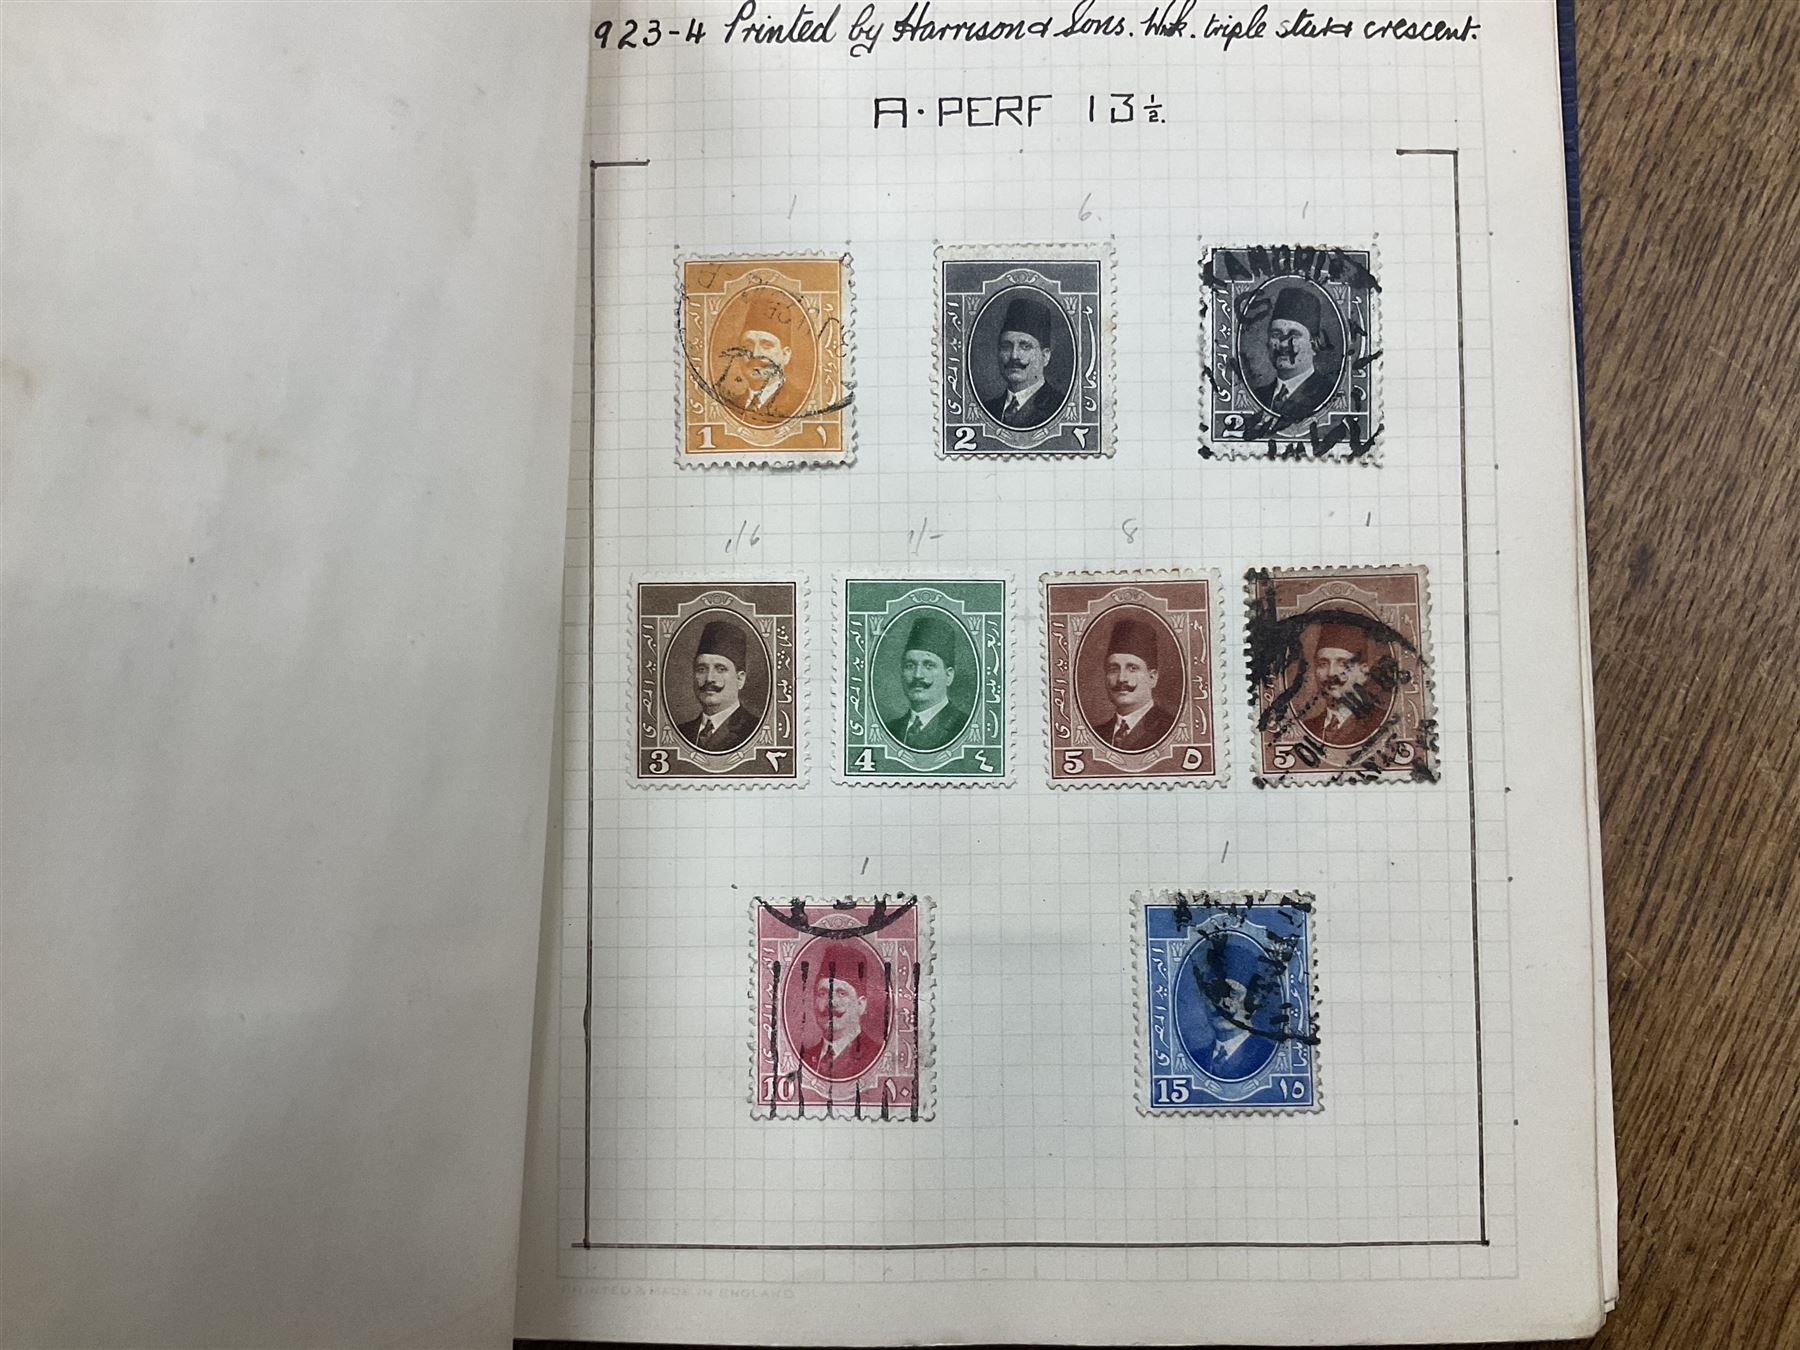 Egypt 1866 and later stamps - Image 571 of 761